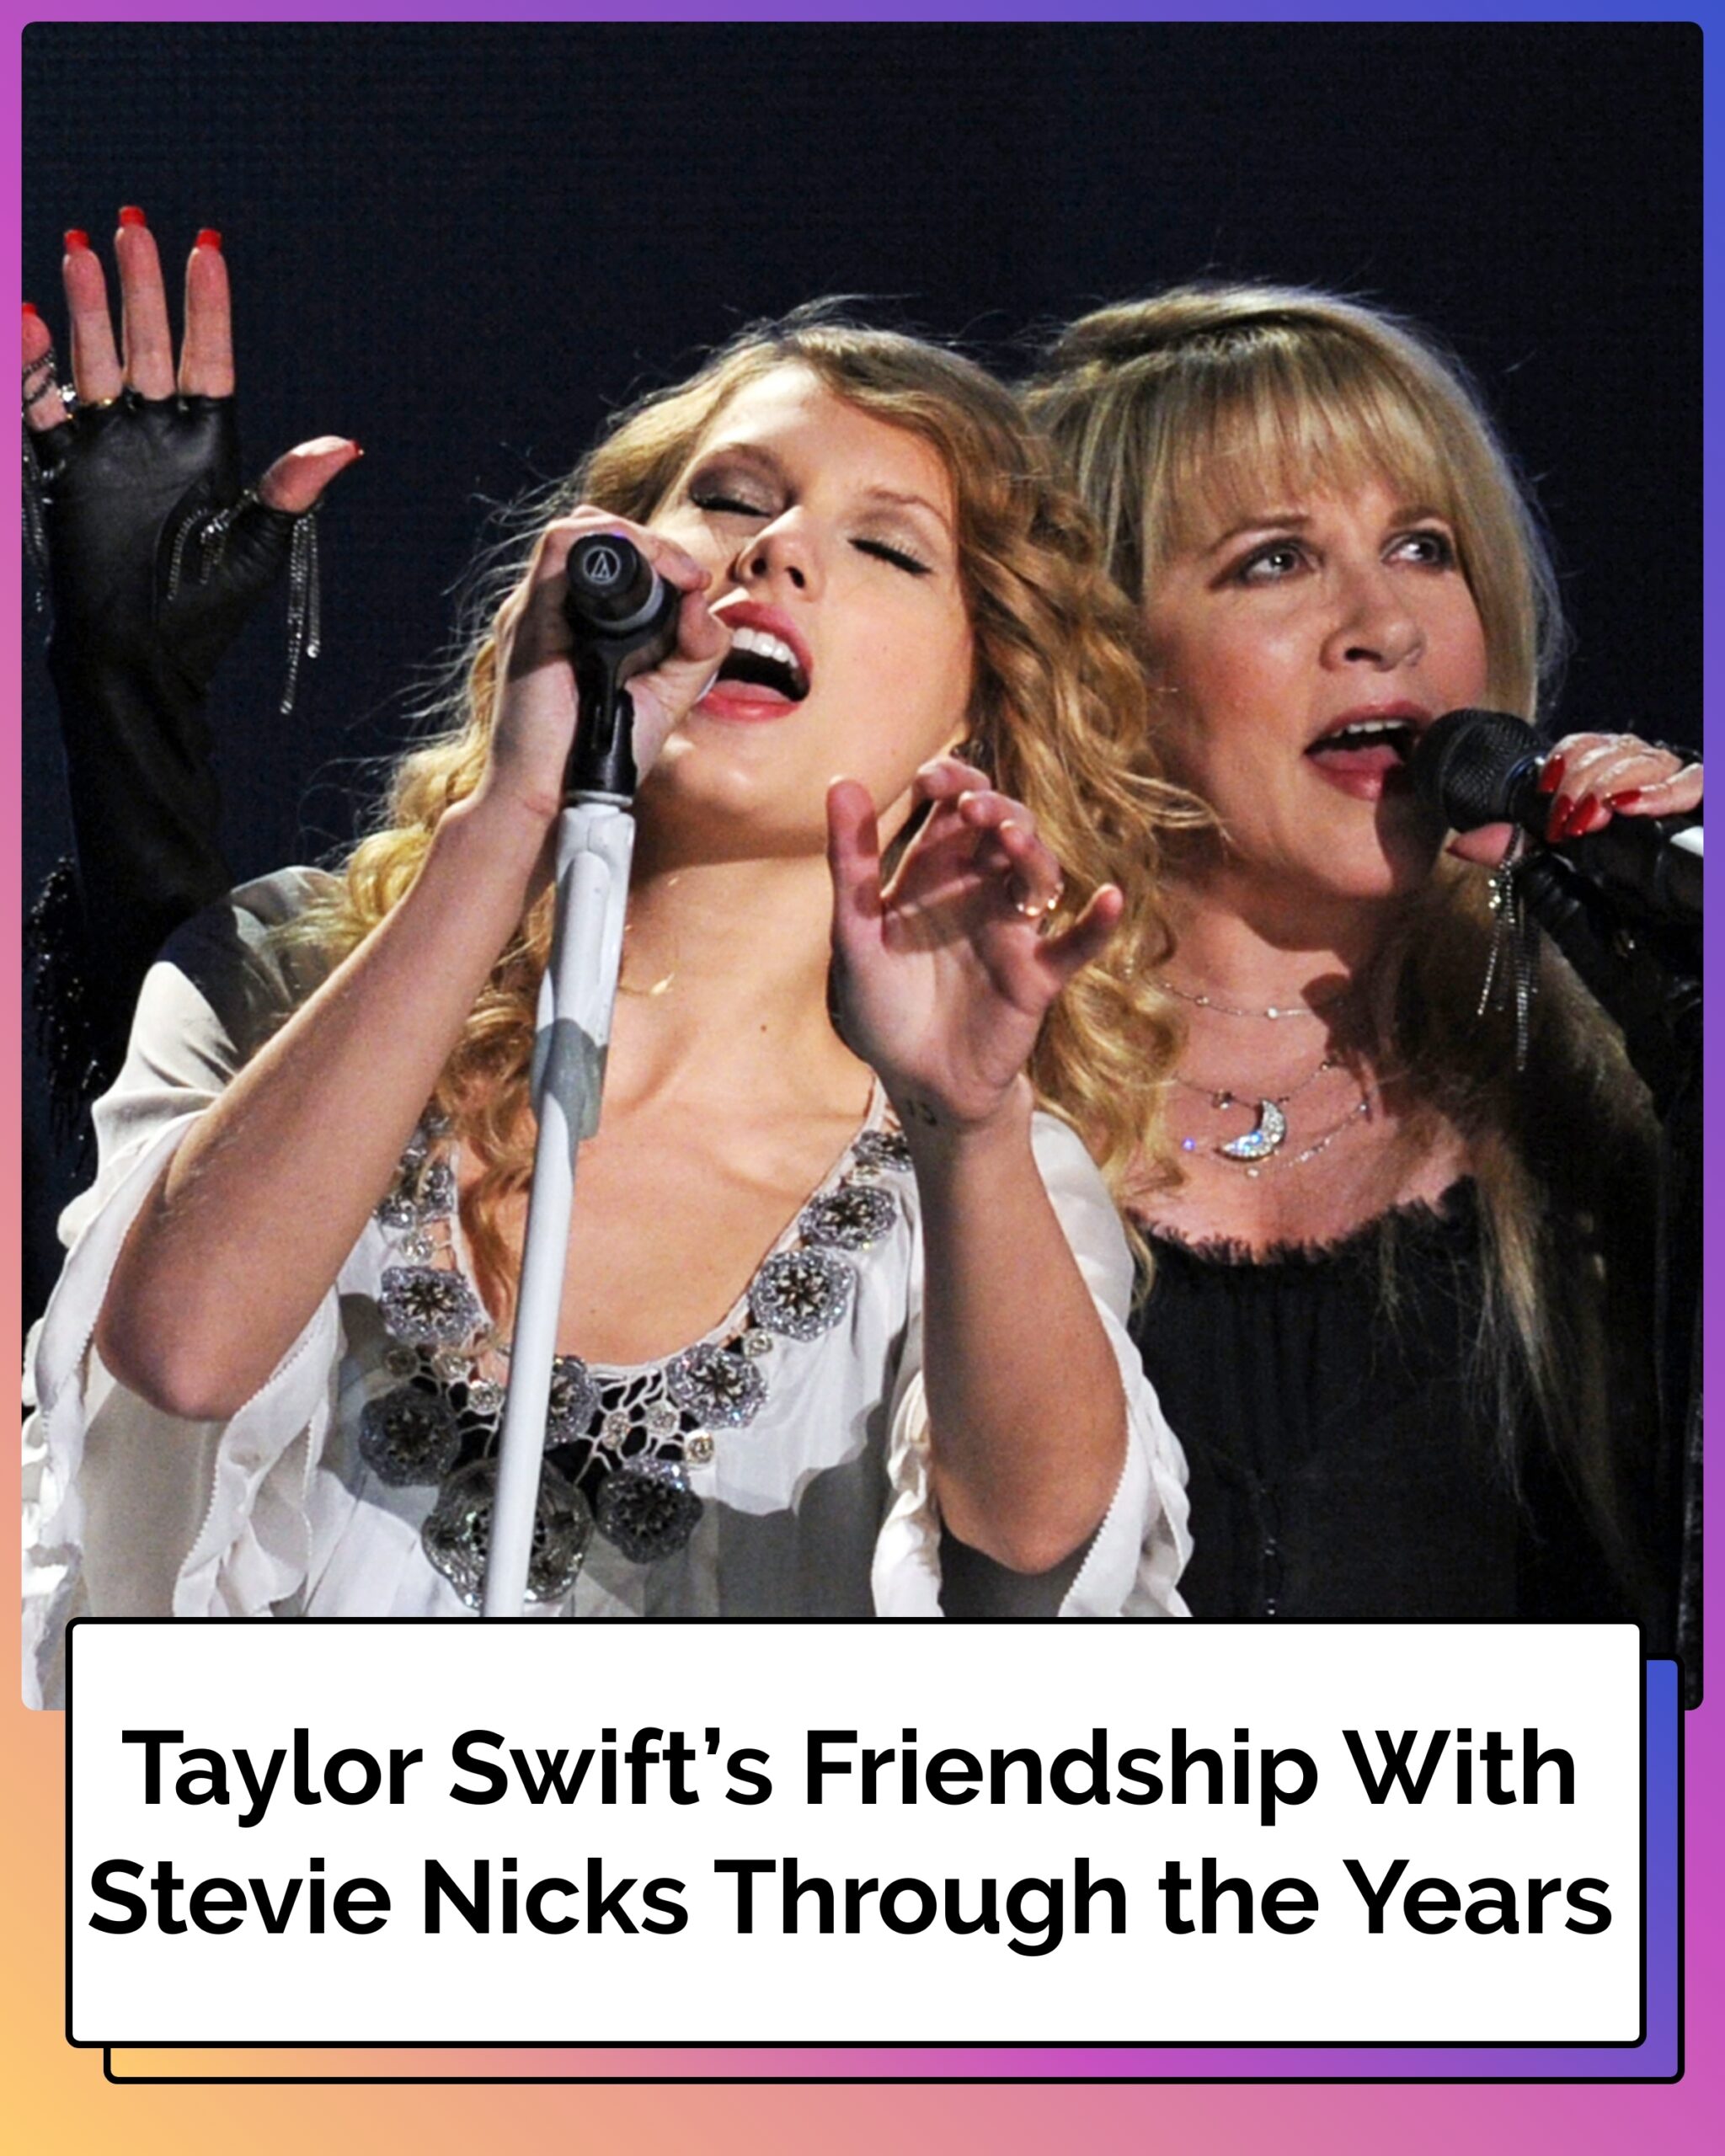 Taylor Swift’s Friendship With Stevie Nicks Through the Years